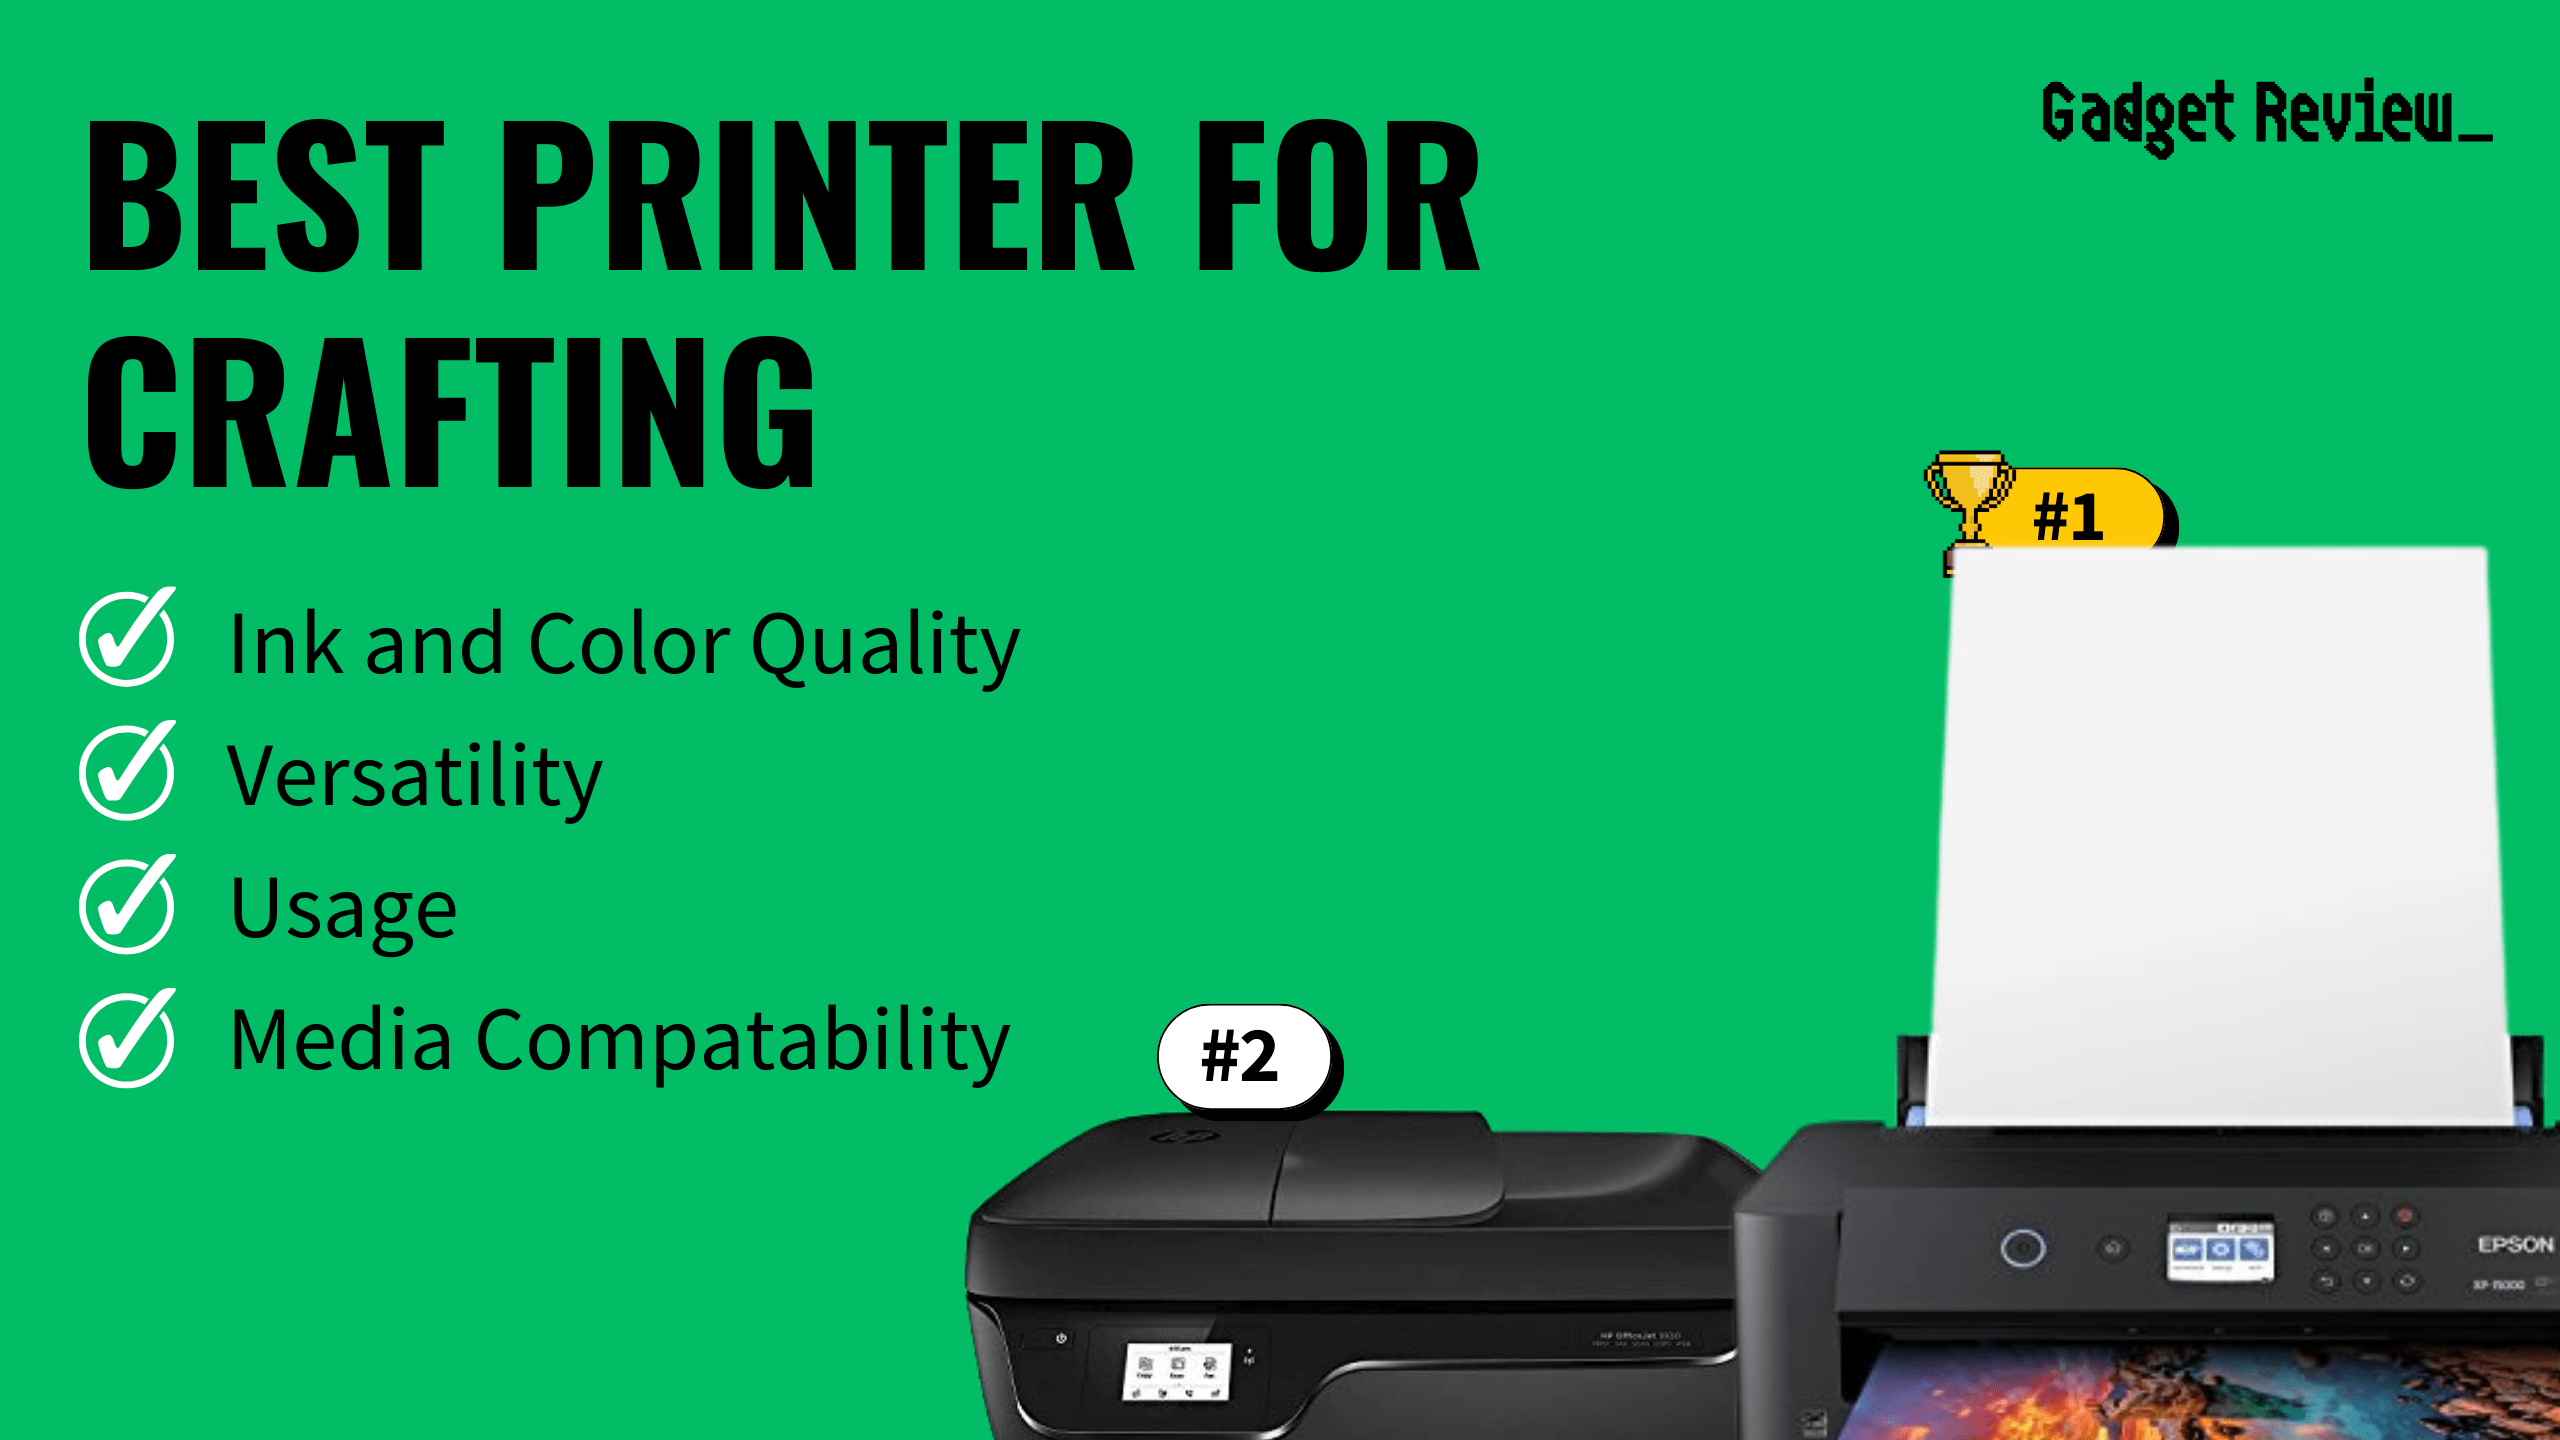 Best Printer for Crafting